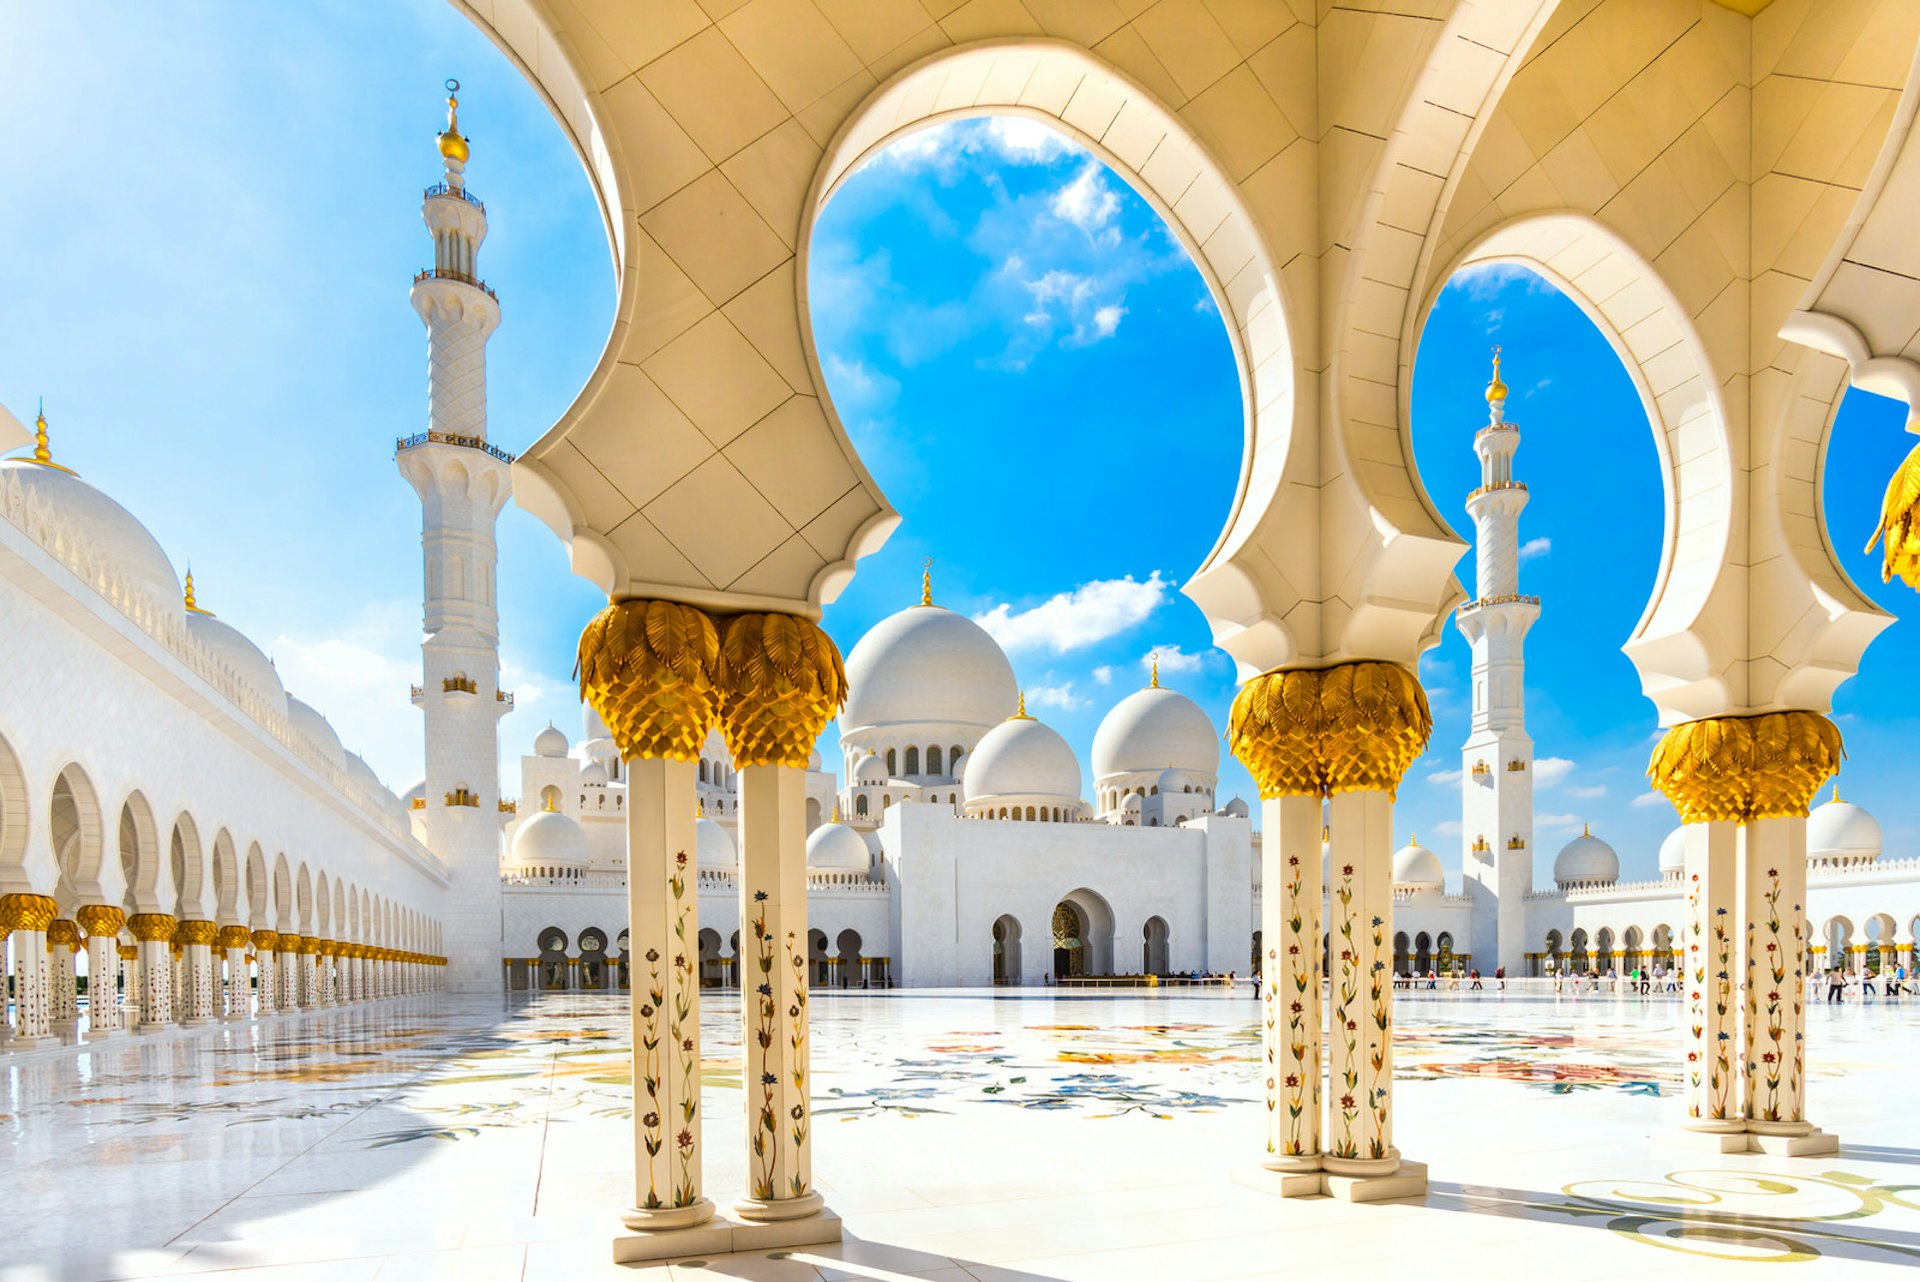 The beautifully decorated arches and interior courtyard at Sheikh Zayed Mosque, Abu Dhabi, United Arab Emirates